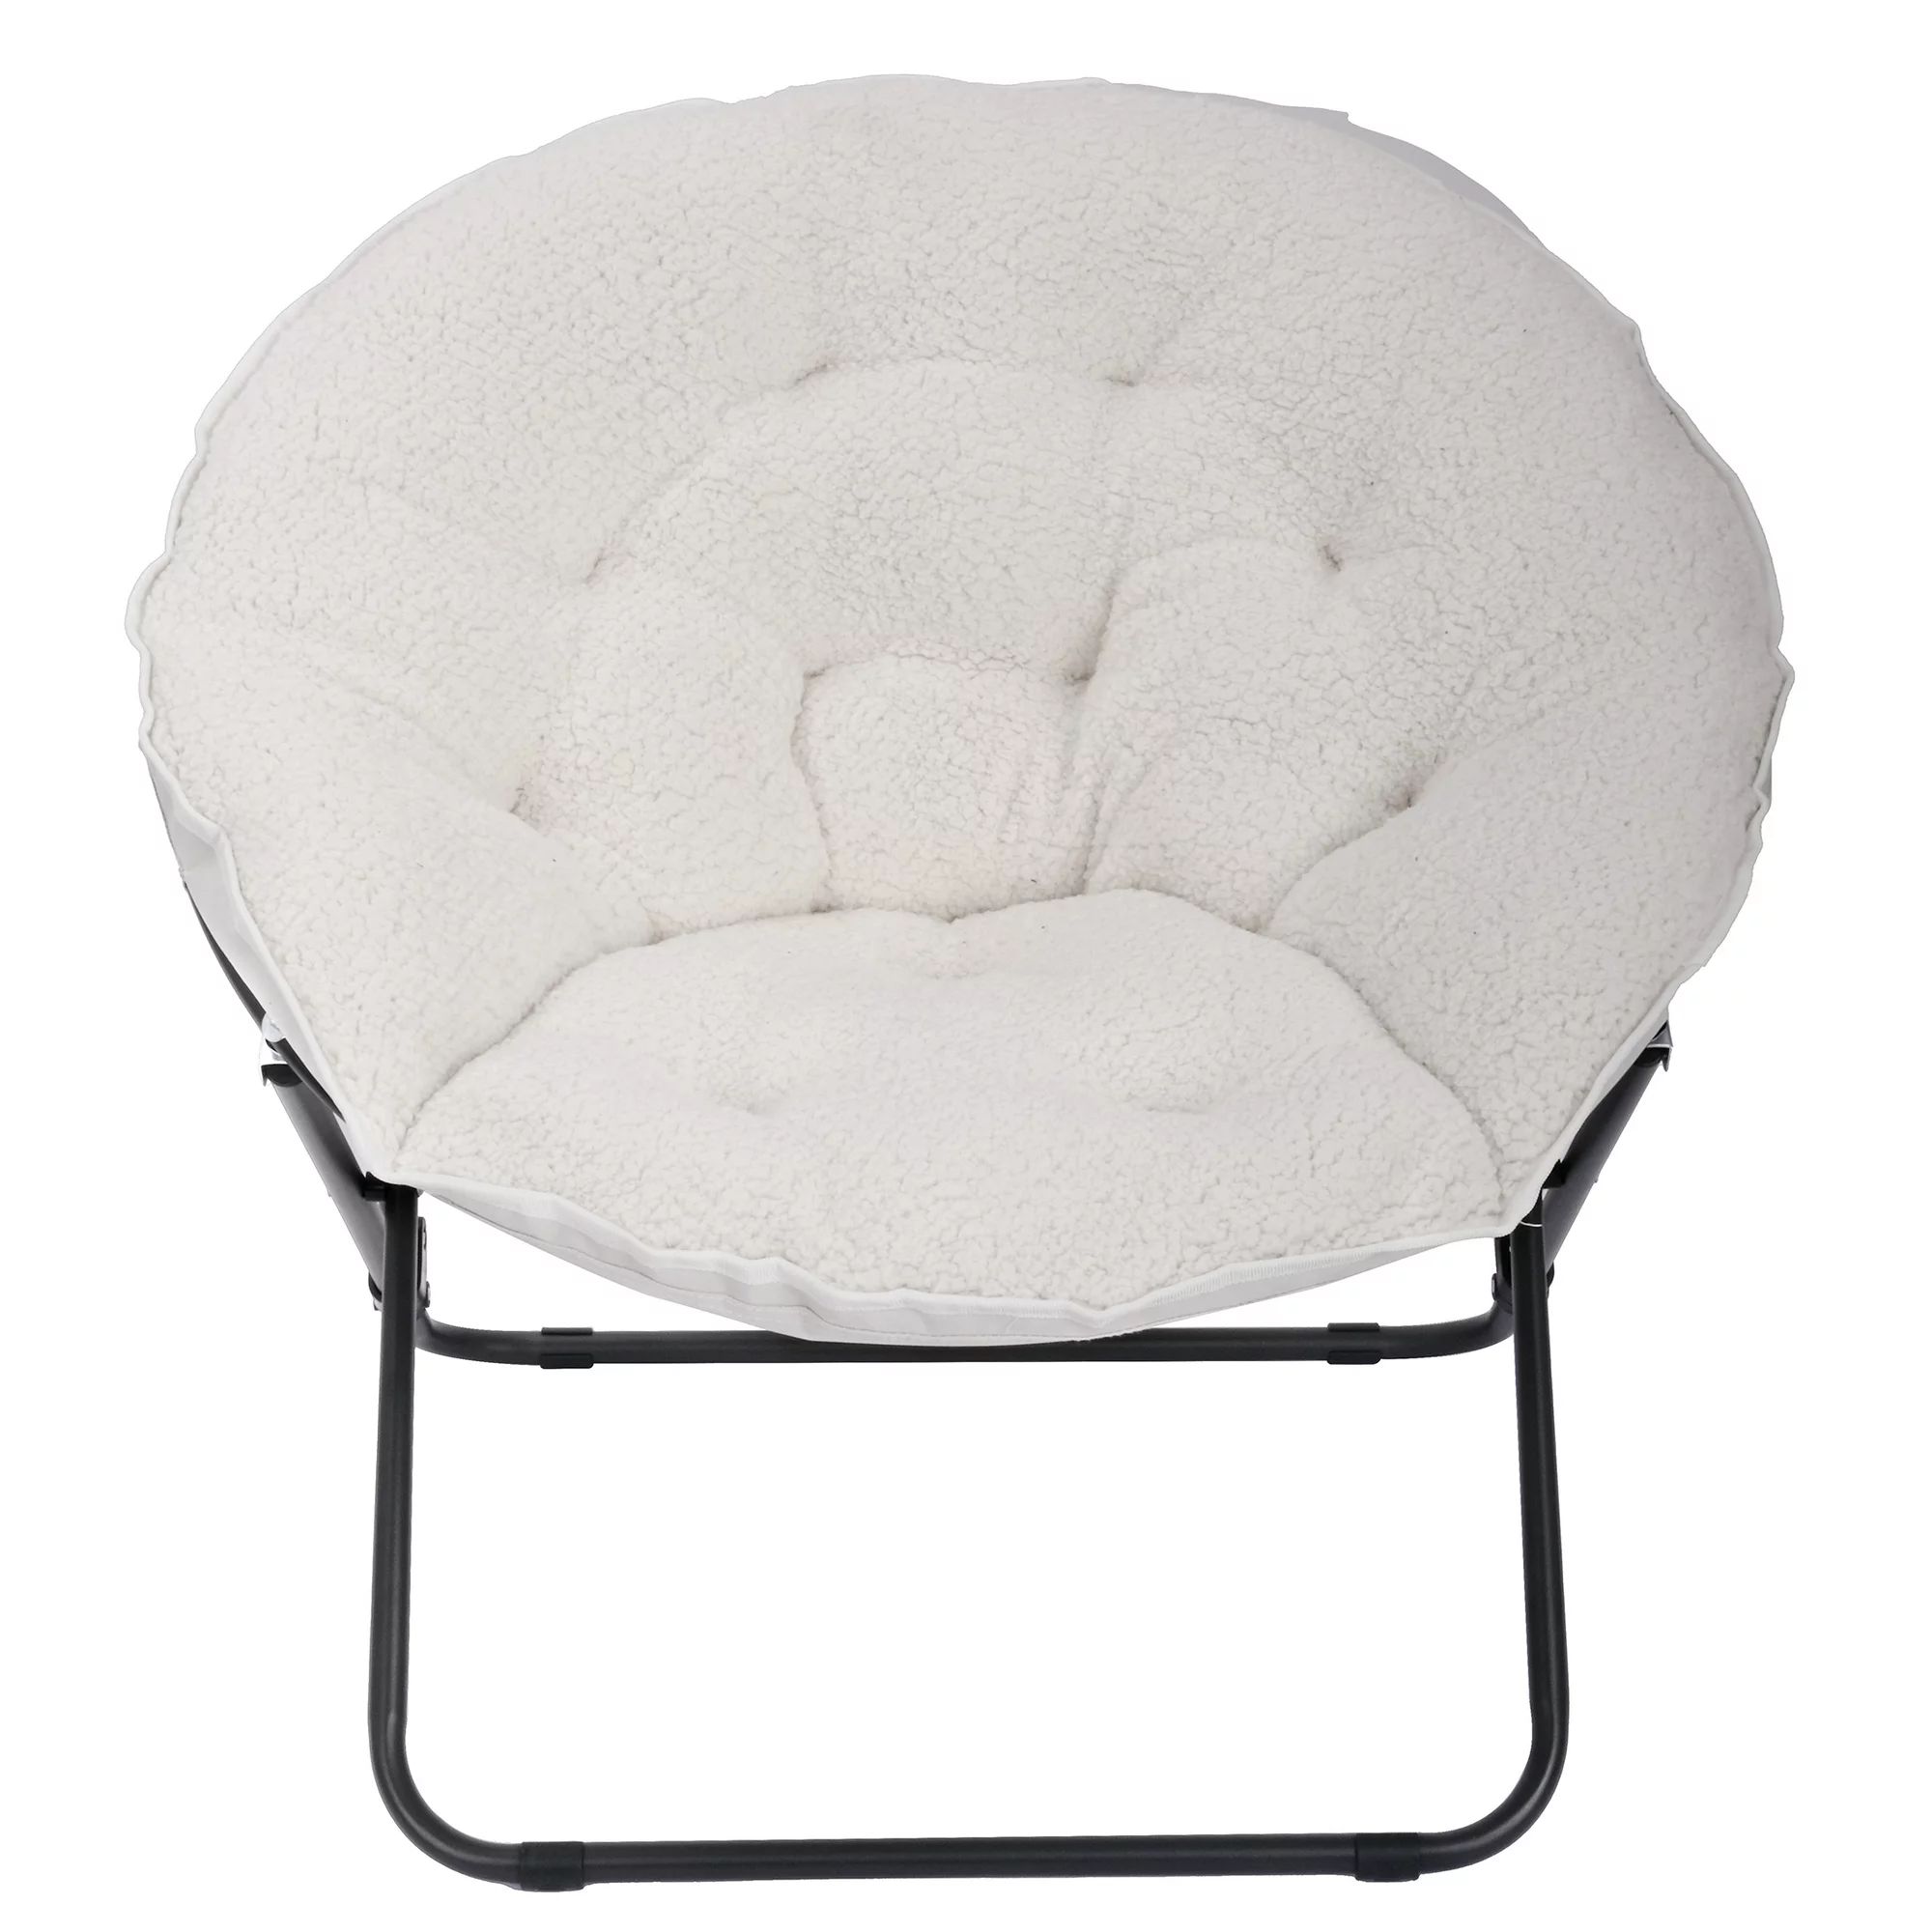 Mainstays Saucer Chair, White Faux Shearling | Walmart (US)